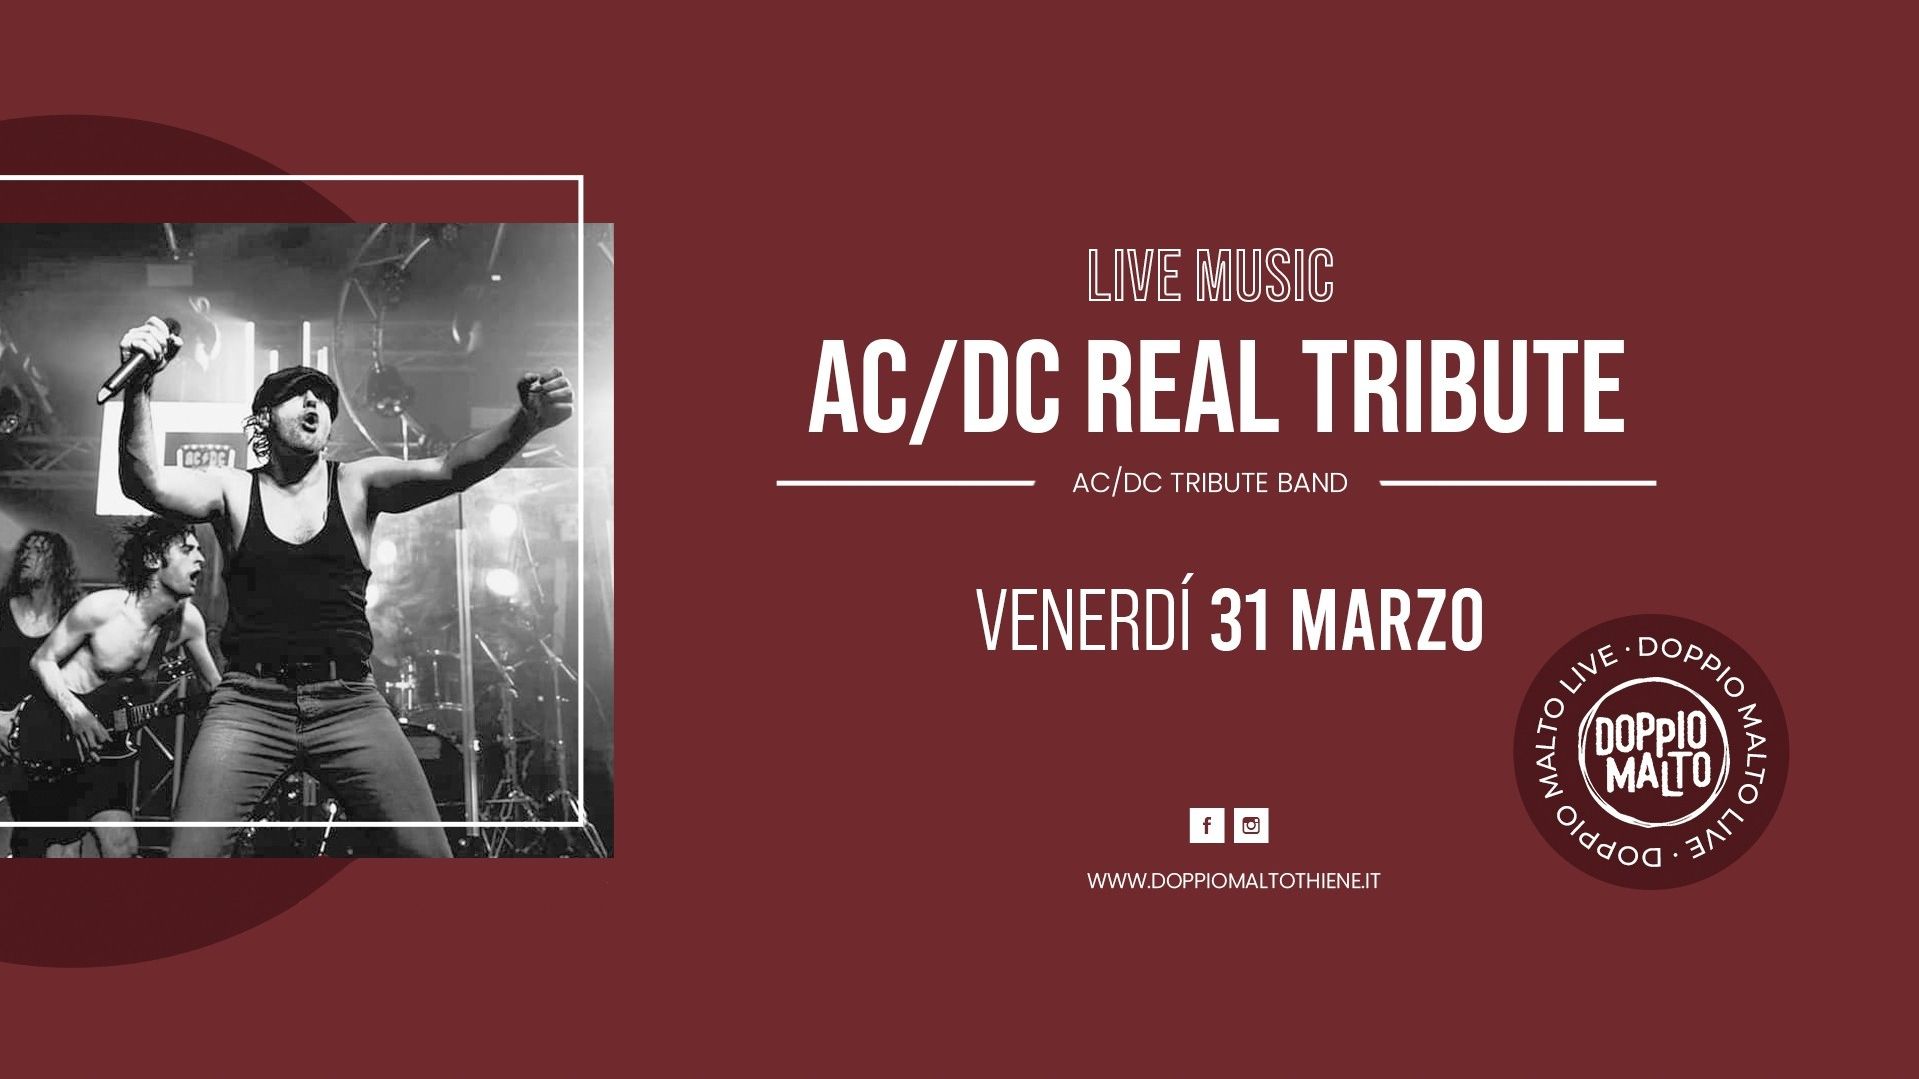 Ac/dc Real Tribute - Tribute band Ac/dc